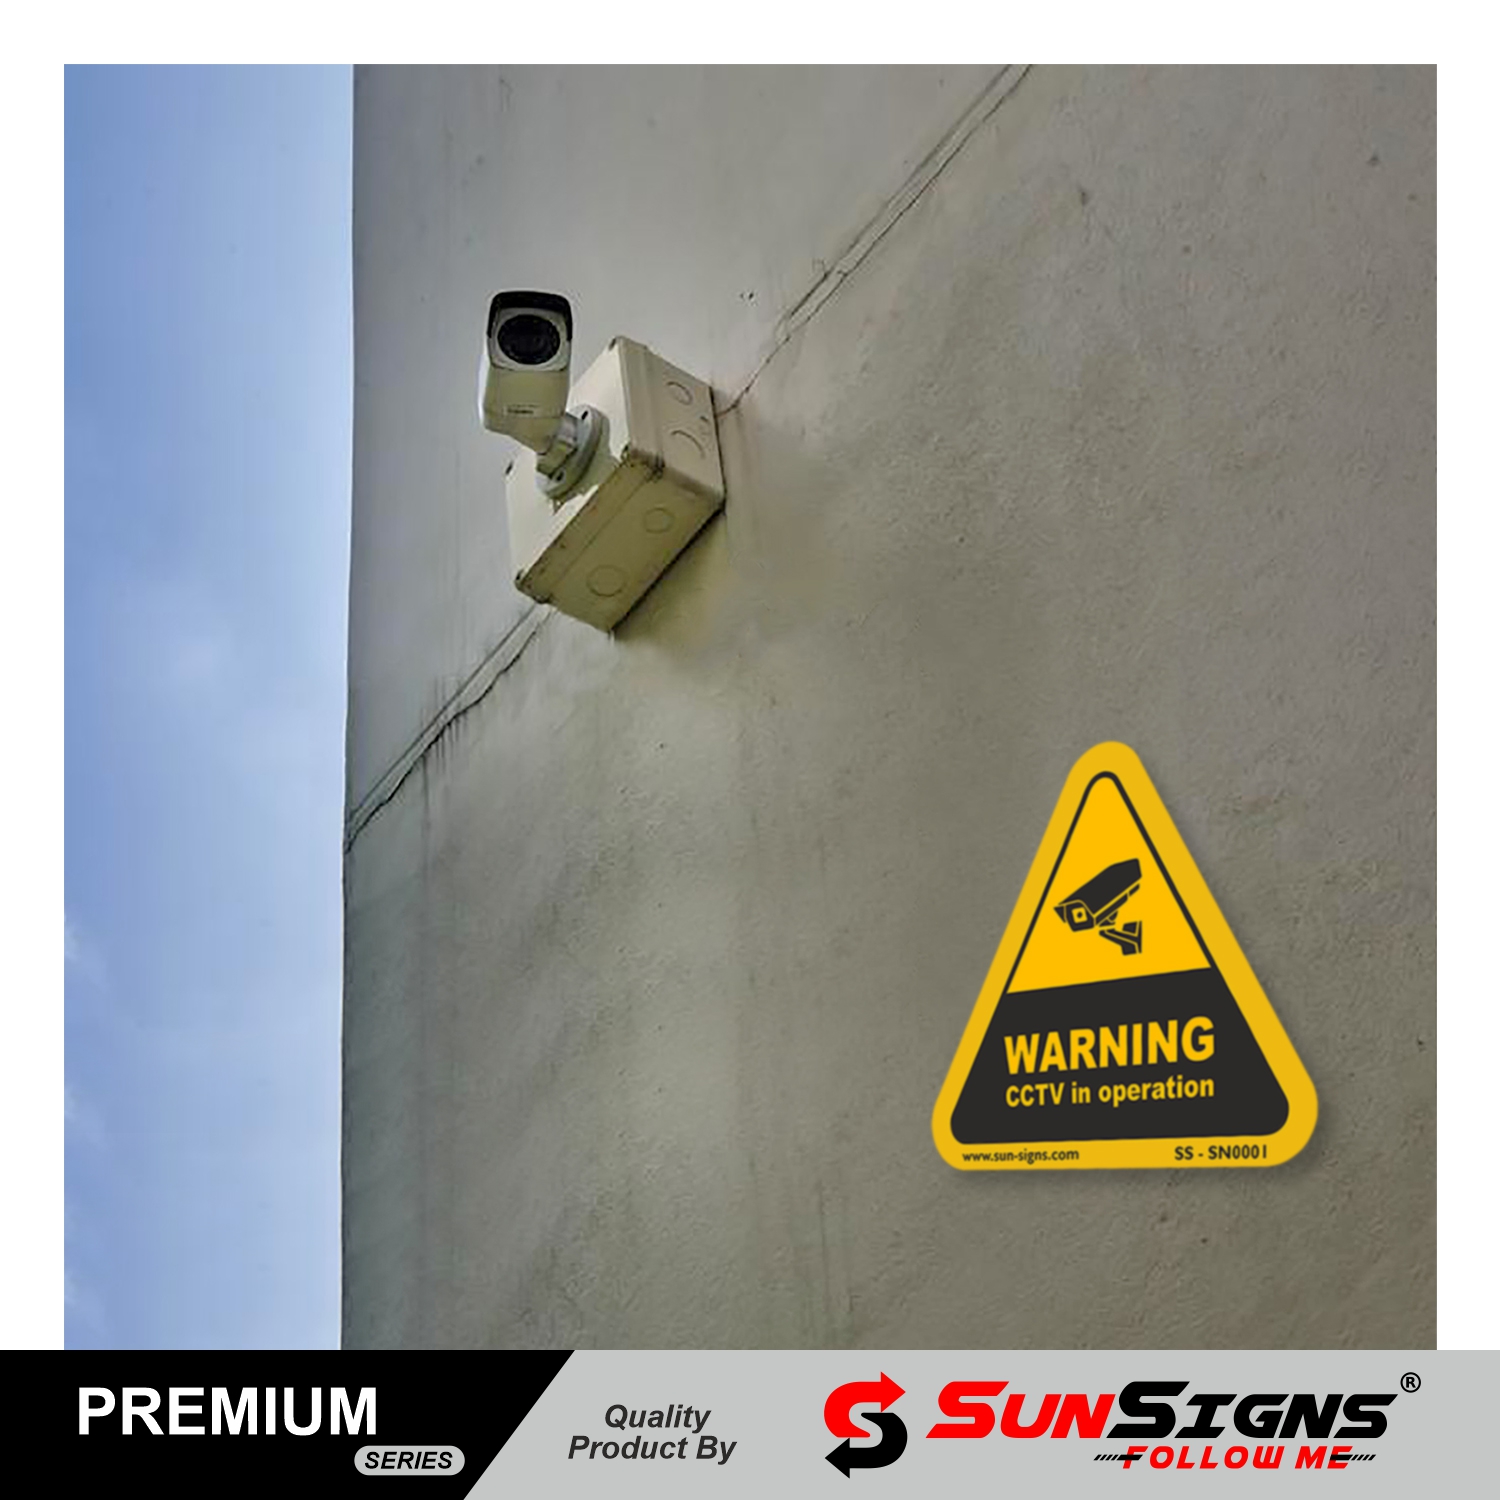 SUNSIGNS - 10 Pcs CCTV Signage Board Under Surveillance CCTV Camera Warning sticker CCTV Cameras in Operation Sign board Highly Durable Material // Honeycomb sheet 700 GSM